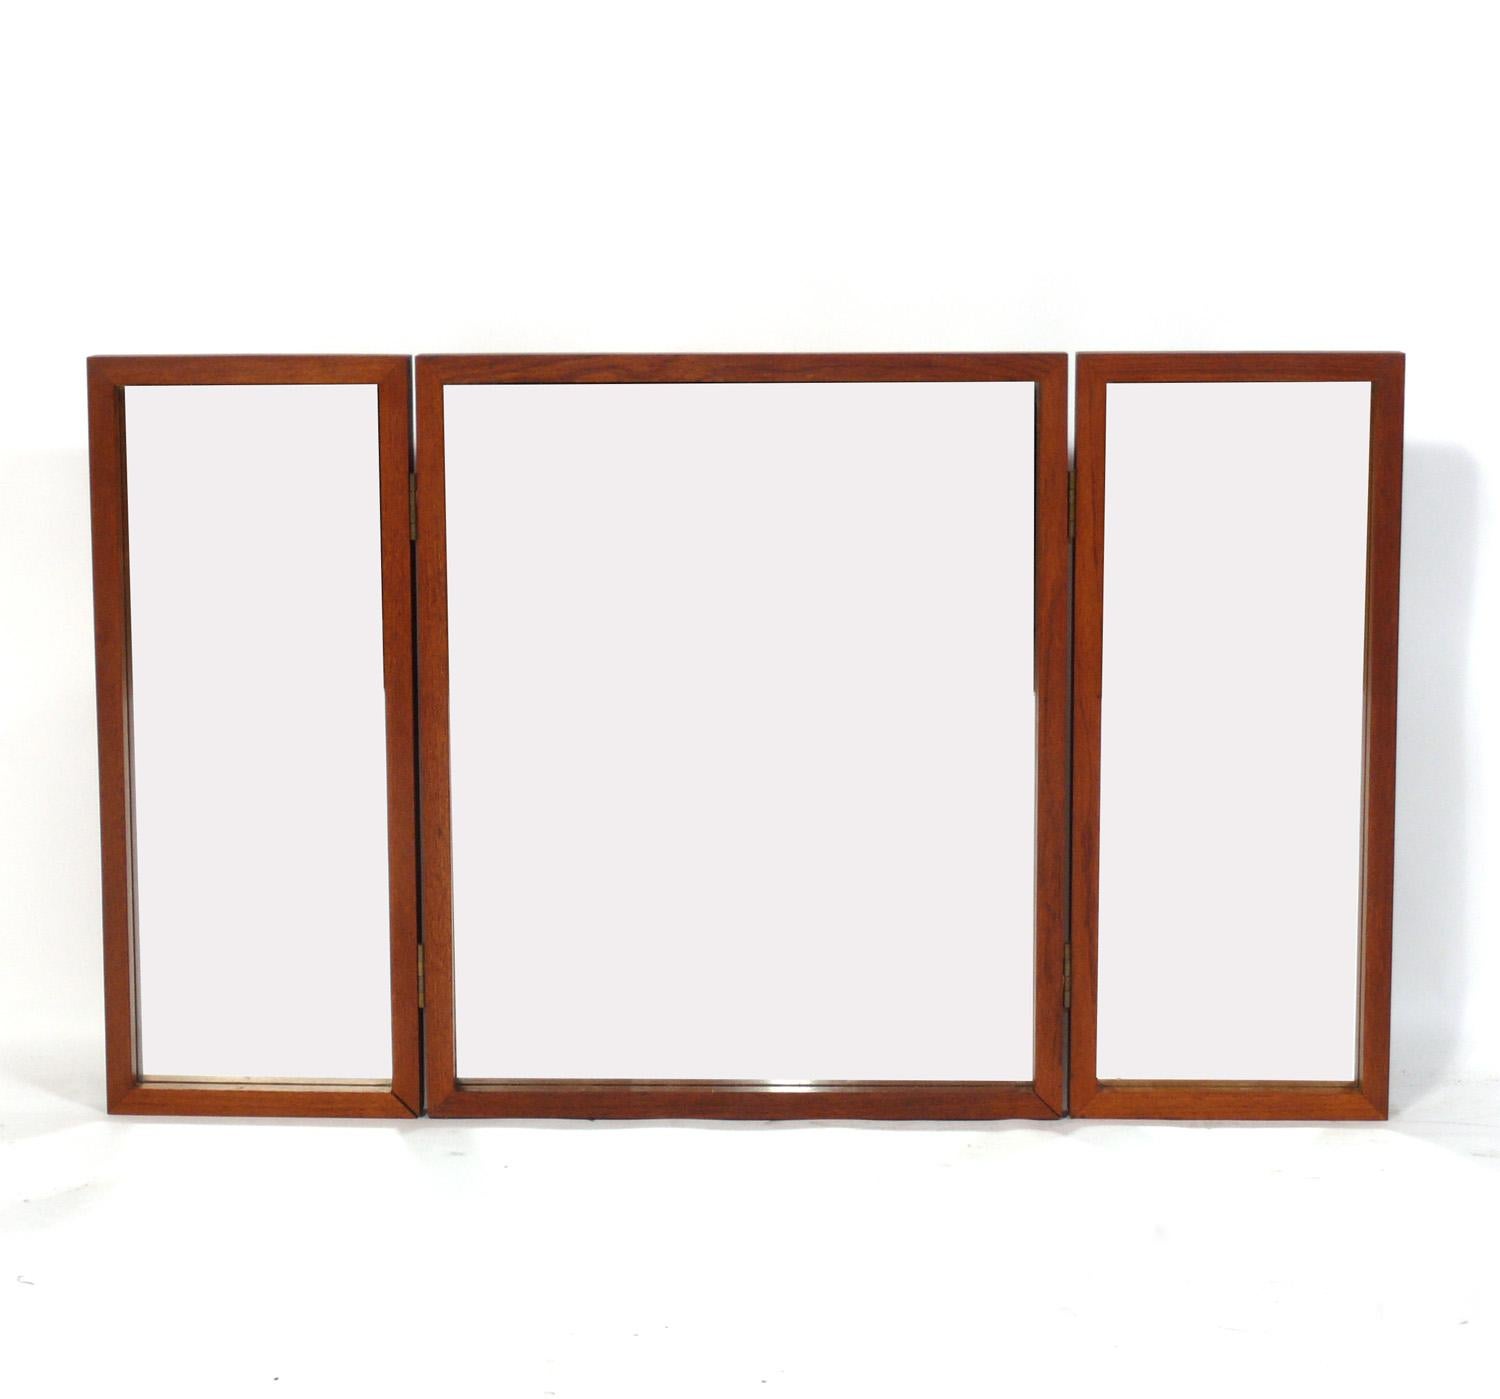 Danish Modern teak tri fold mirror, designed by Aksel Kjersgaard, Denmark, circa 1960s. Three panels are connected with hinges and can be rested on top a table or dresser, or mounted on the wall with the key-hole hangers in the back. The teak has